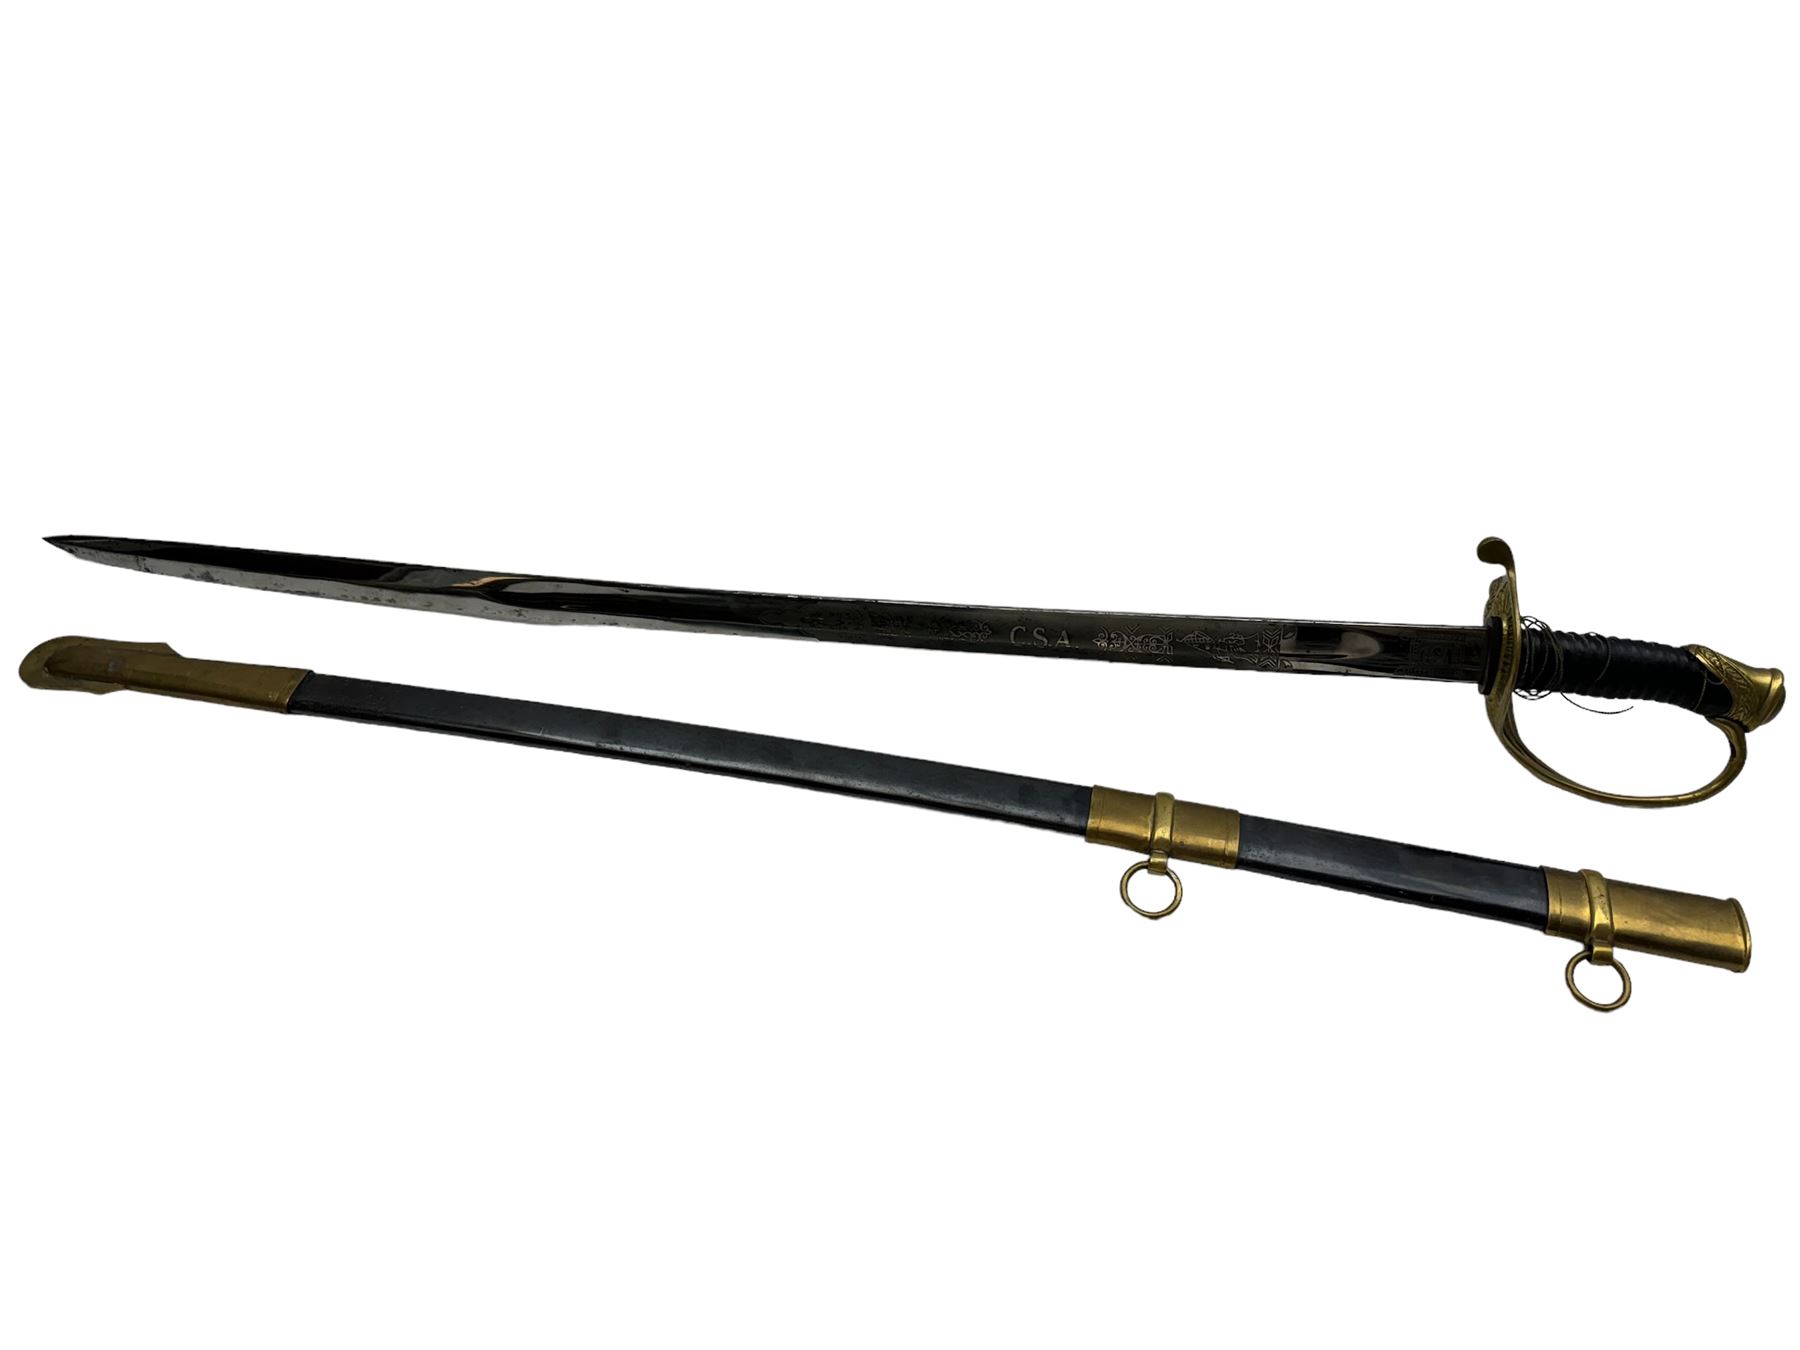 Replica Confederate States Army officer's sword